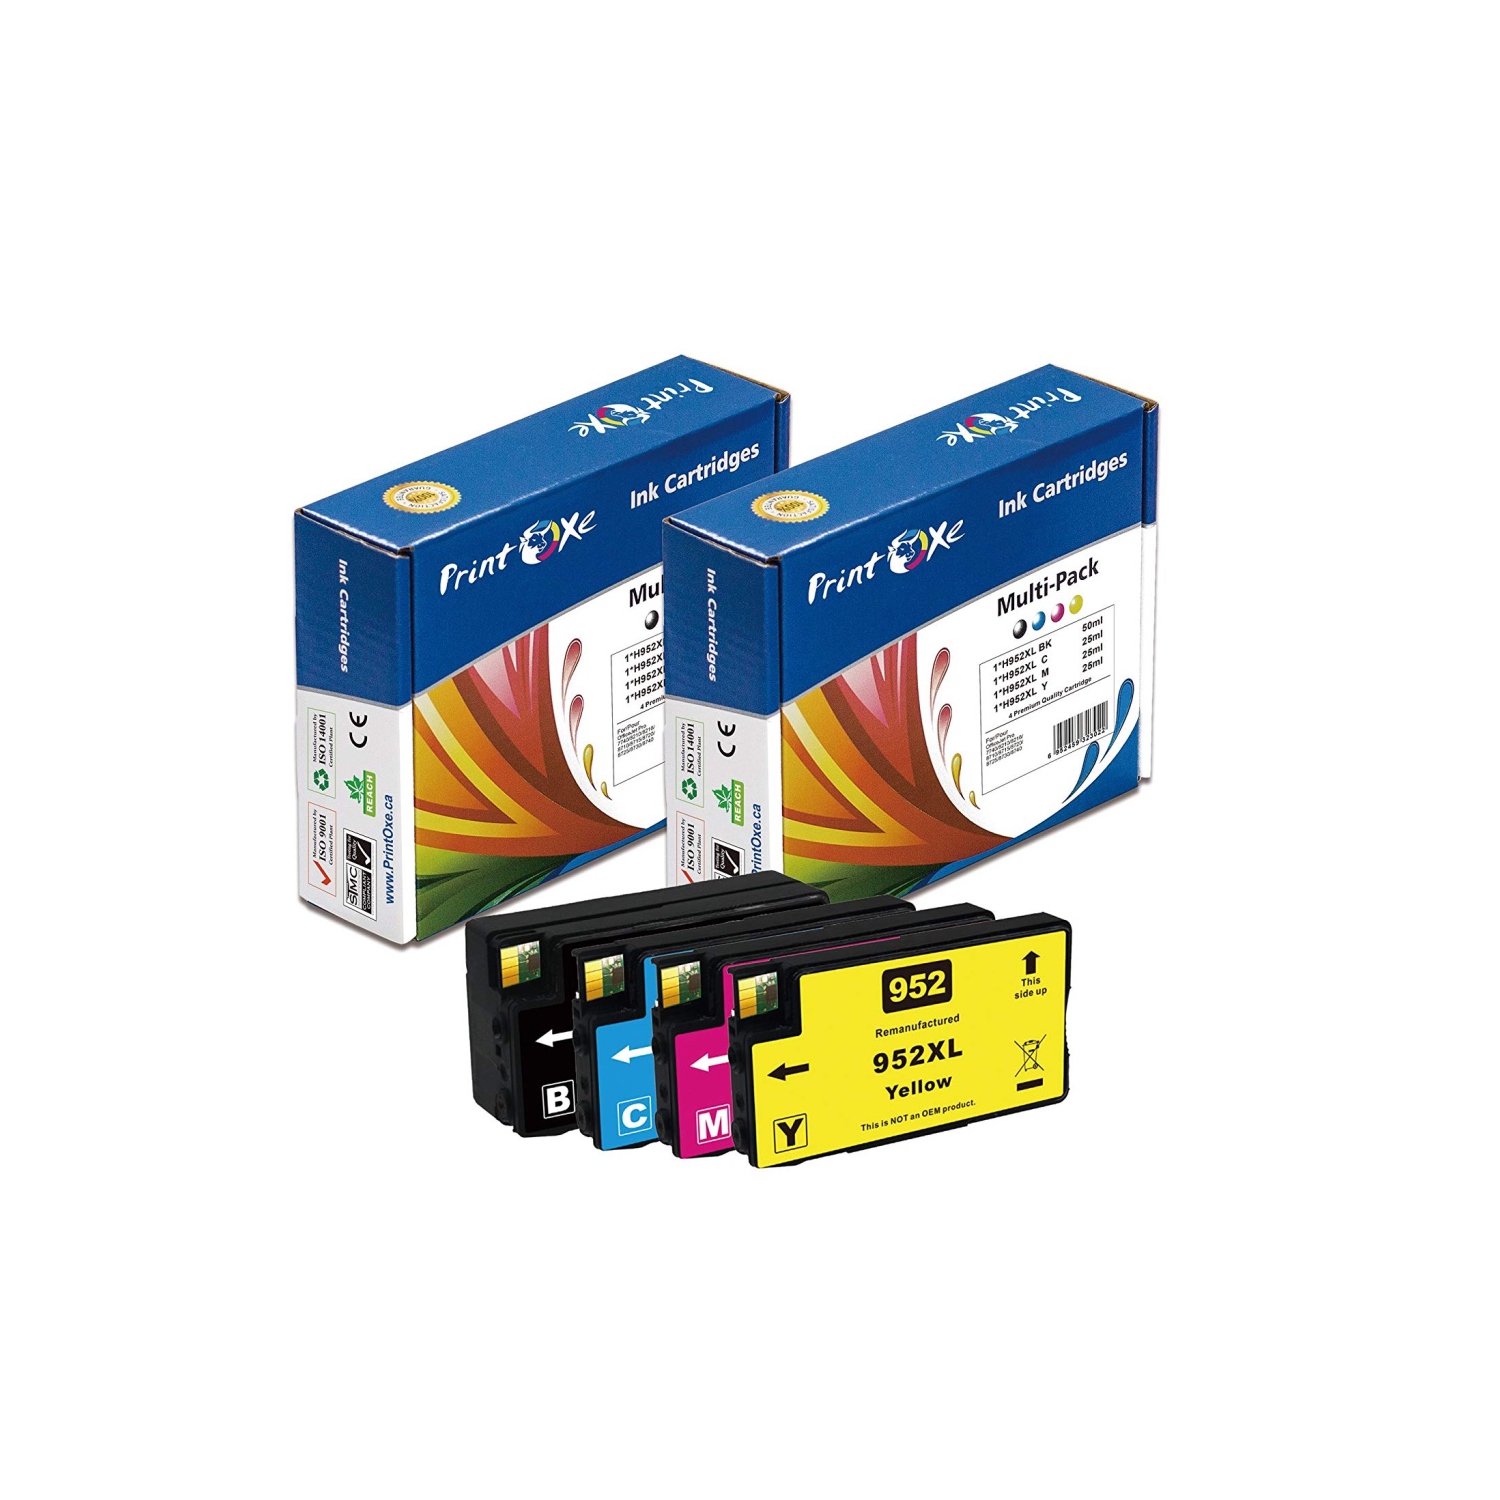 PrintOxe® 952XL Reman Set of 4 Ink Cartridges High Yield 952 for HP OfficeJet Pro 7740 8210 8216 8710 8715 8720 8725 8730 8740